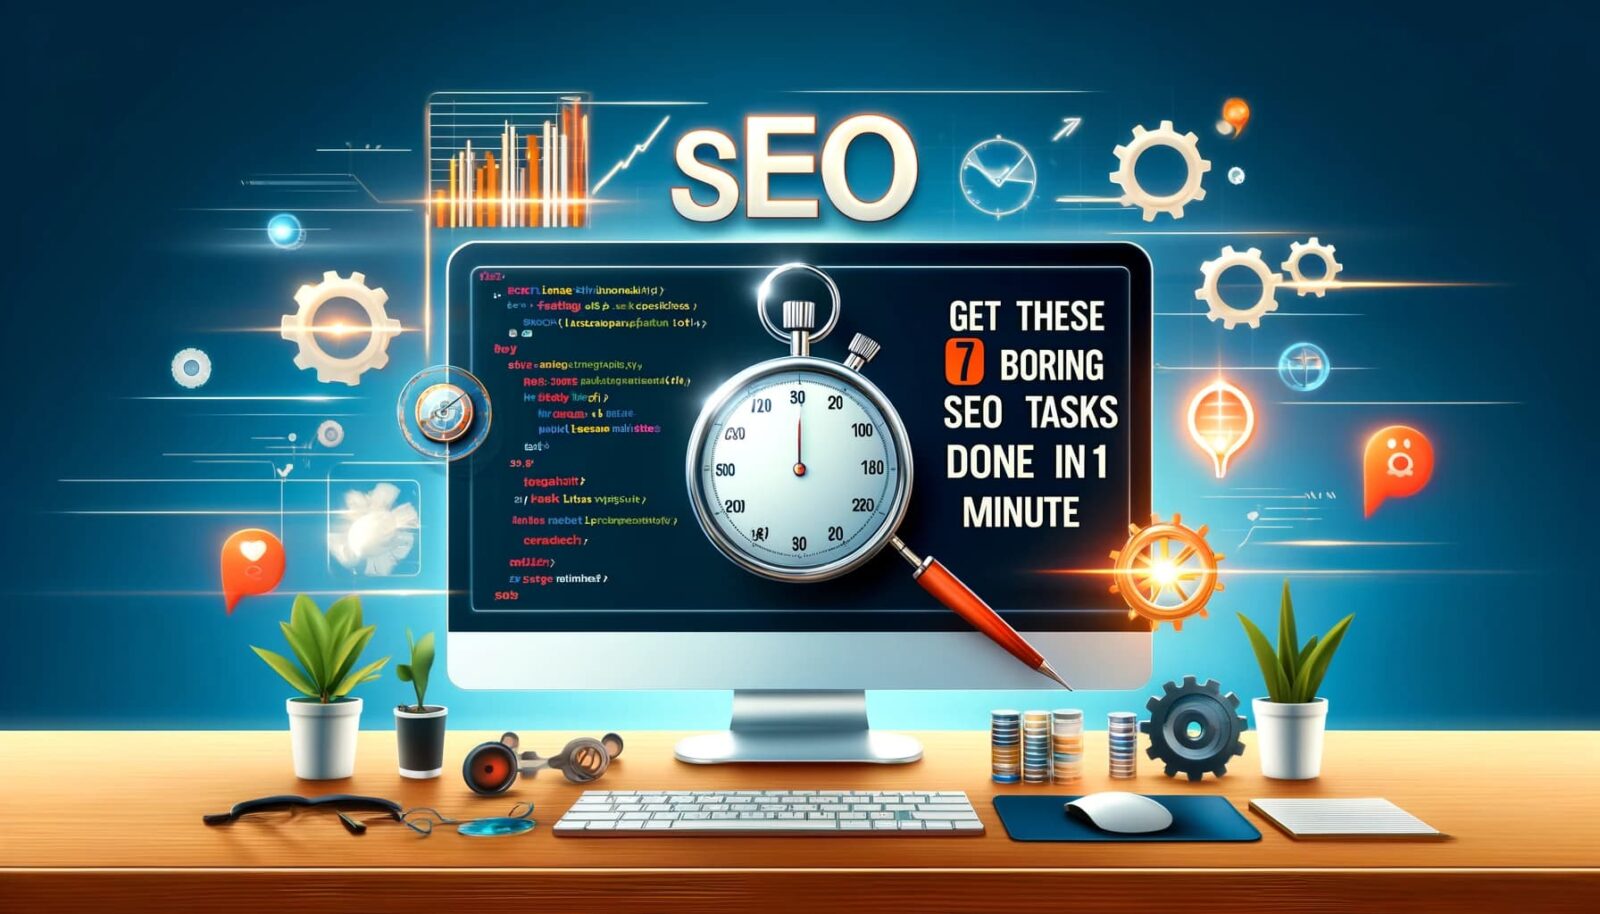 'Get These 7 Boring SEO Tasks Done in 1 Minute with ChatGPT'